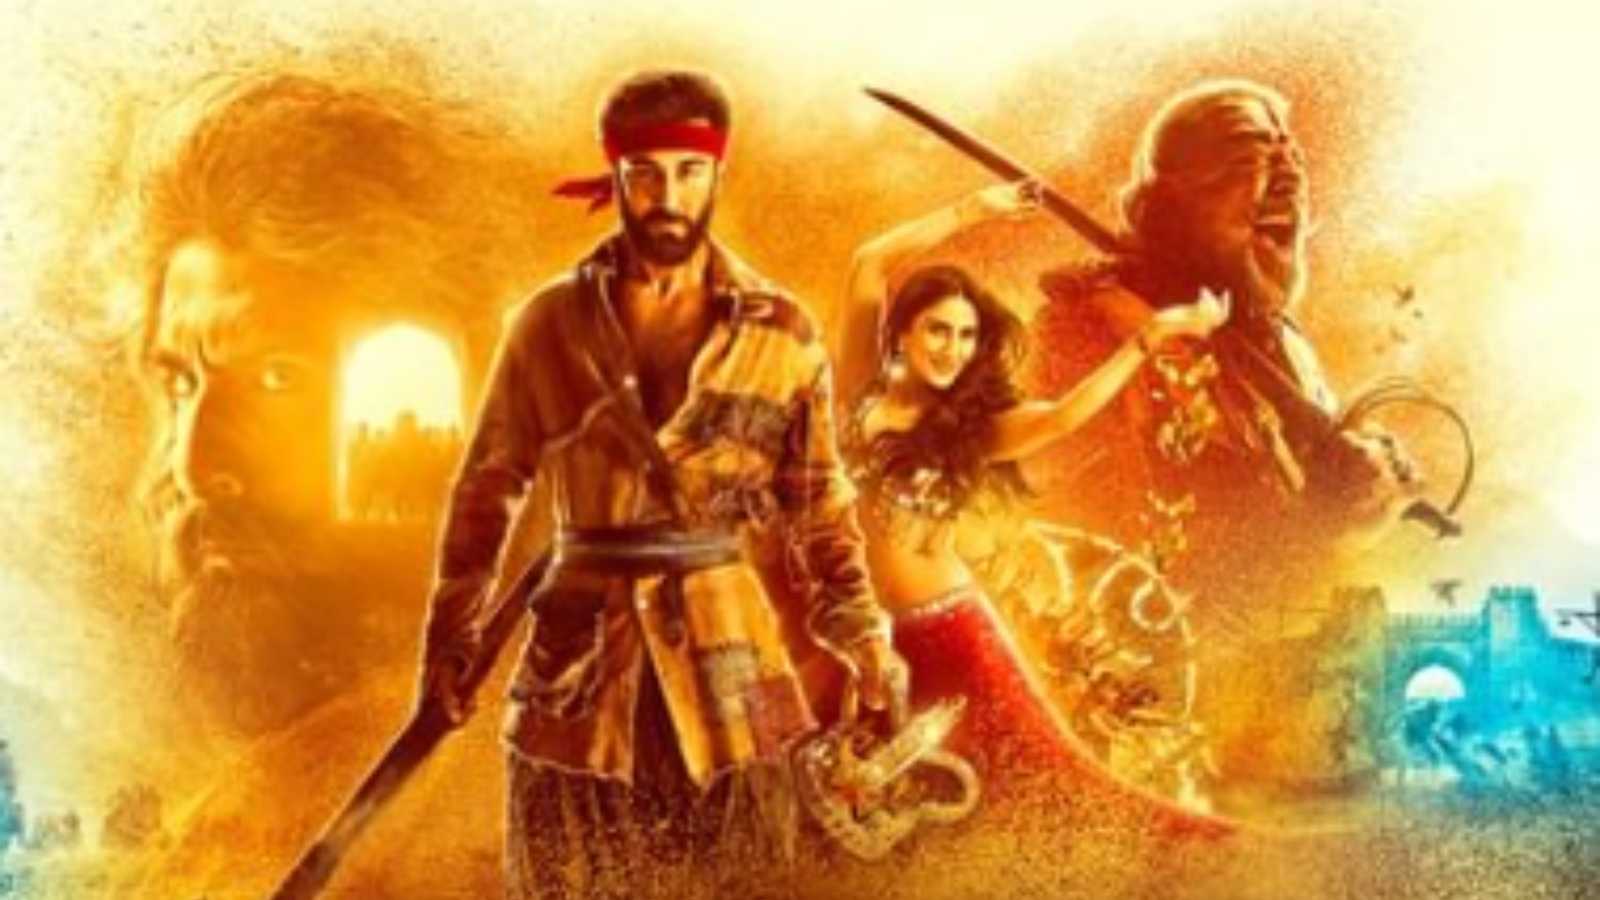 Shamshera box office day 1: Ranbir Kapoor's comeback is a huge disappointment, does this spell trouble for Brahmastra?